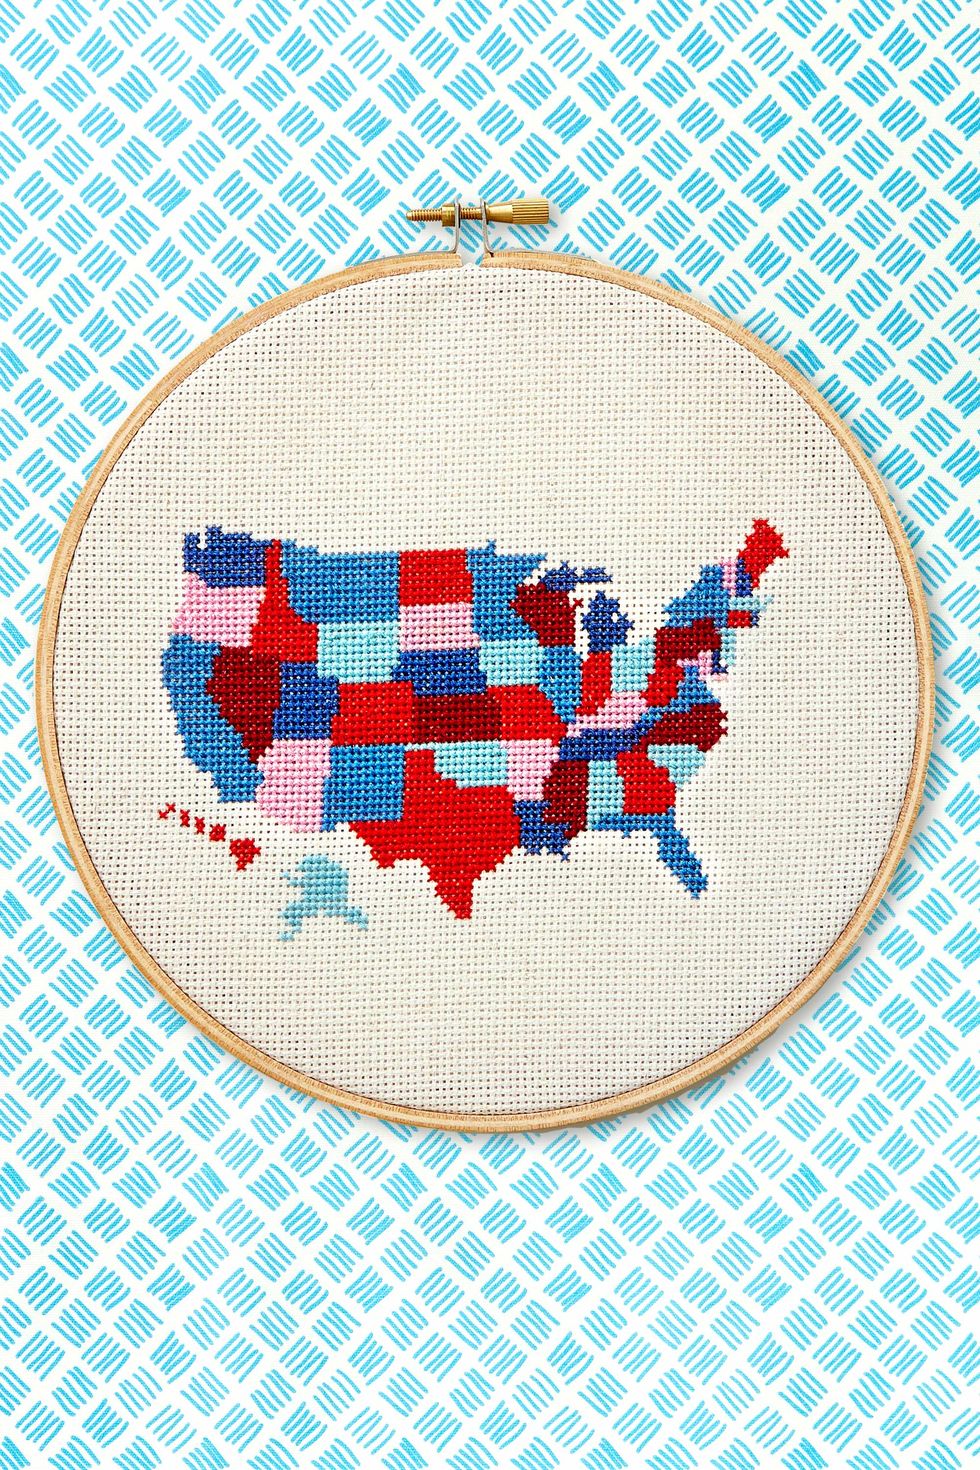 America's Best Cross Stitch Pattern Book by Better Homes and